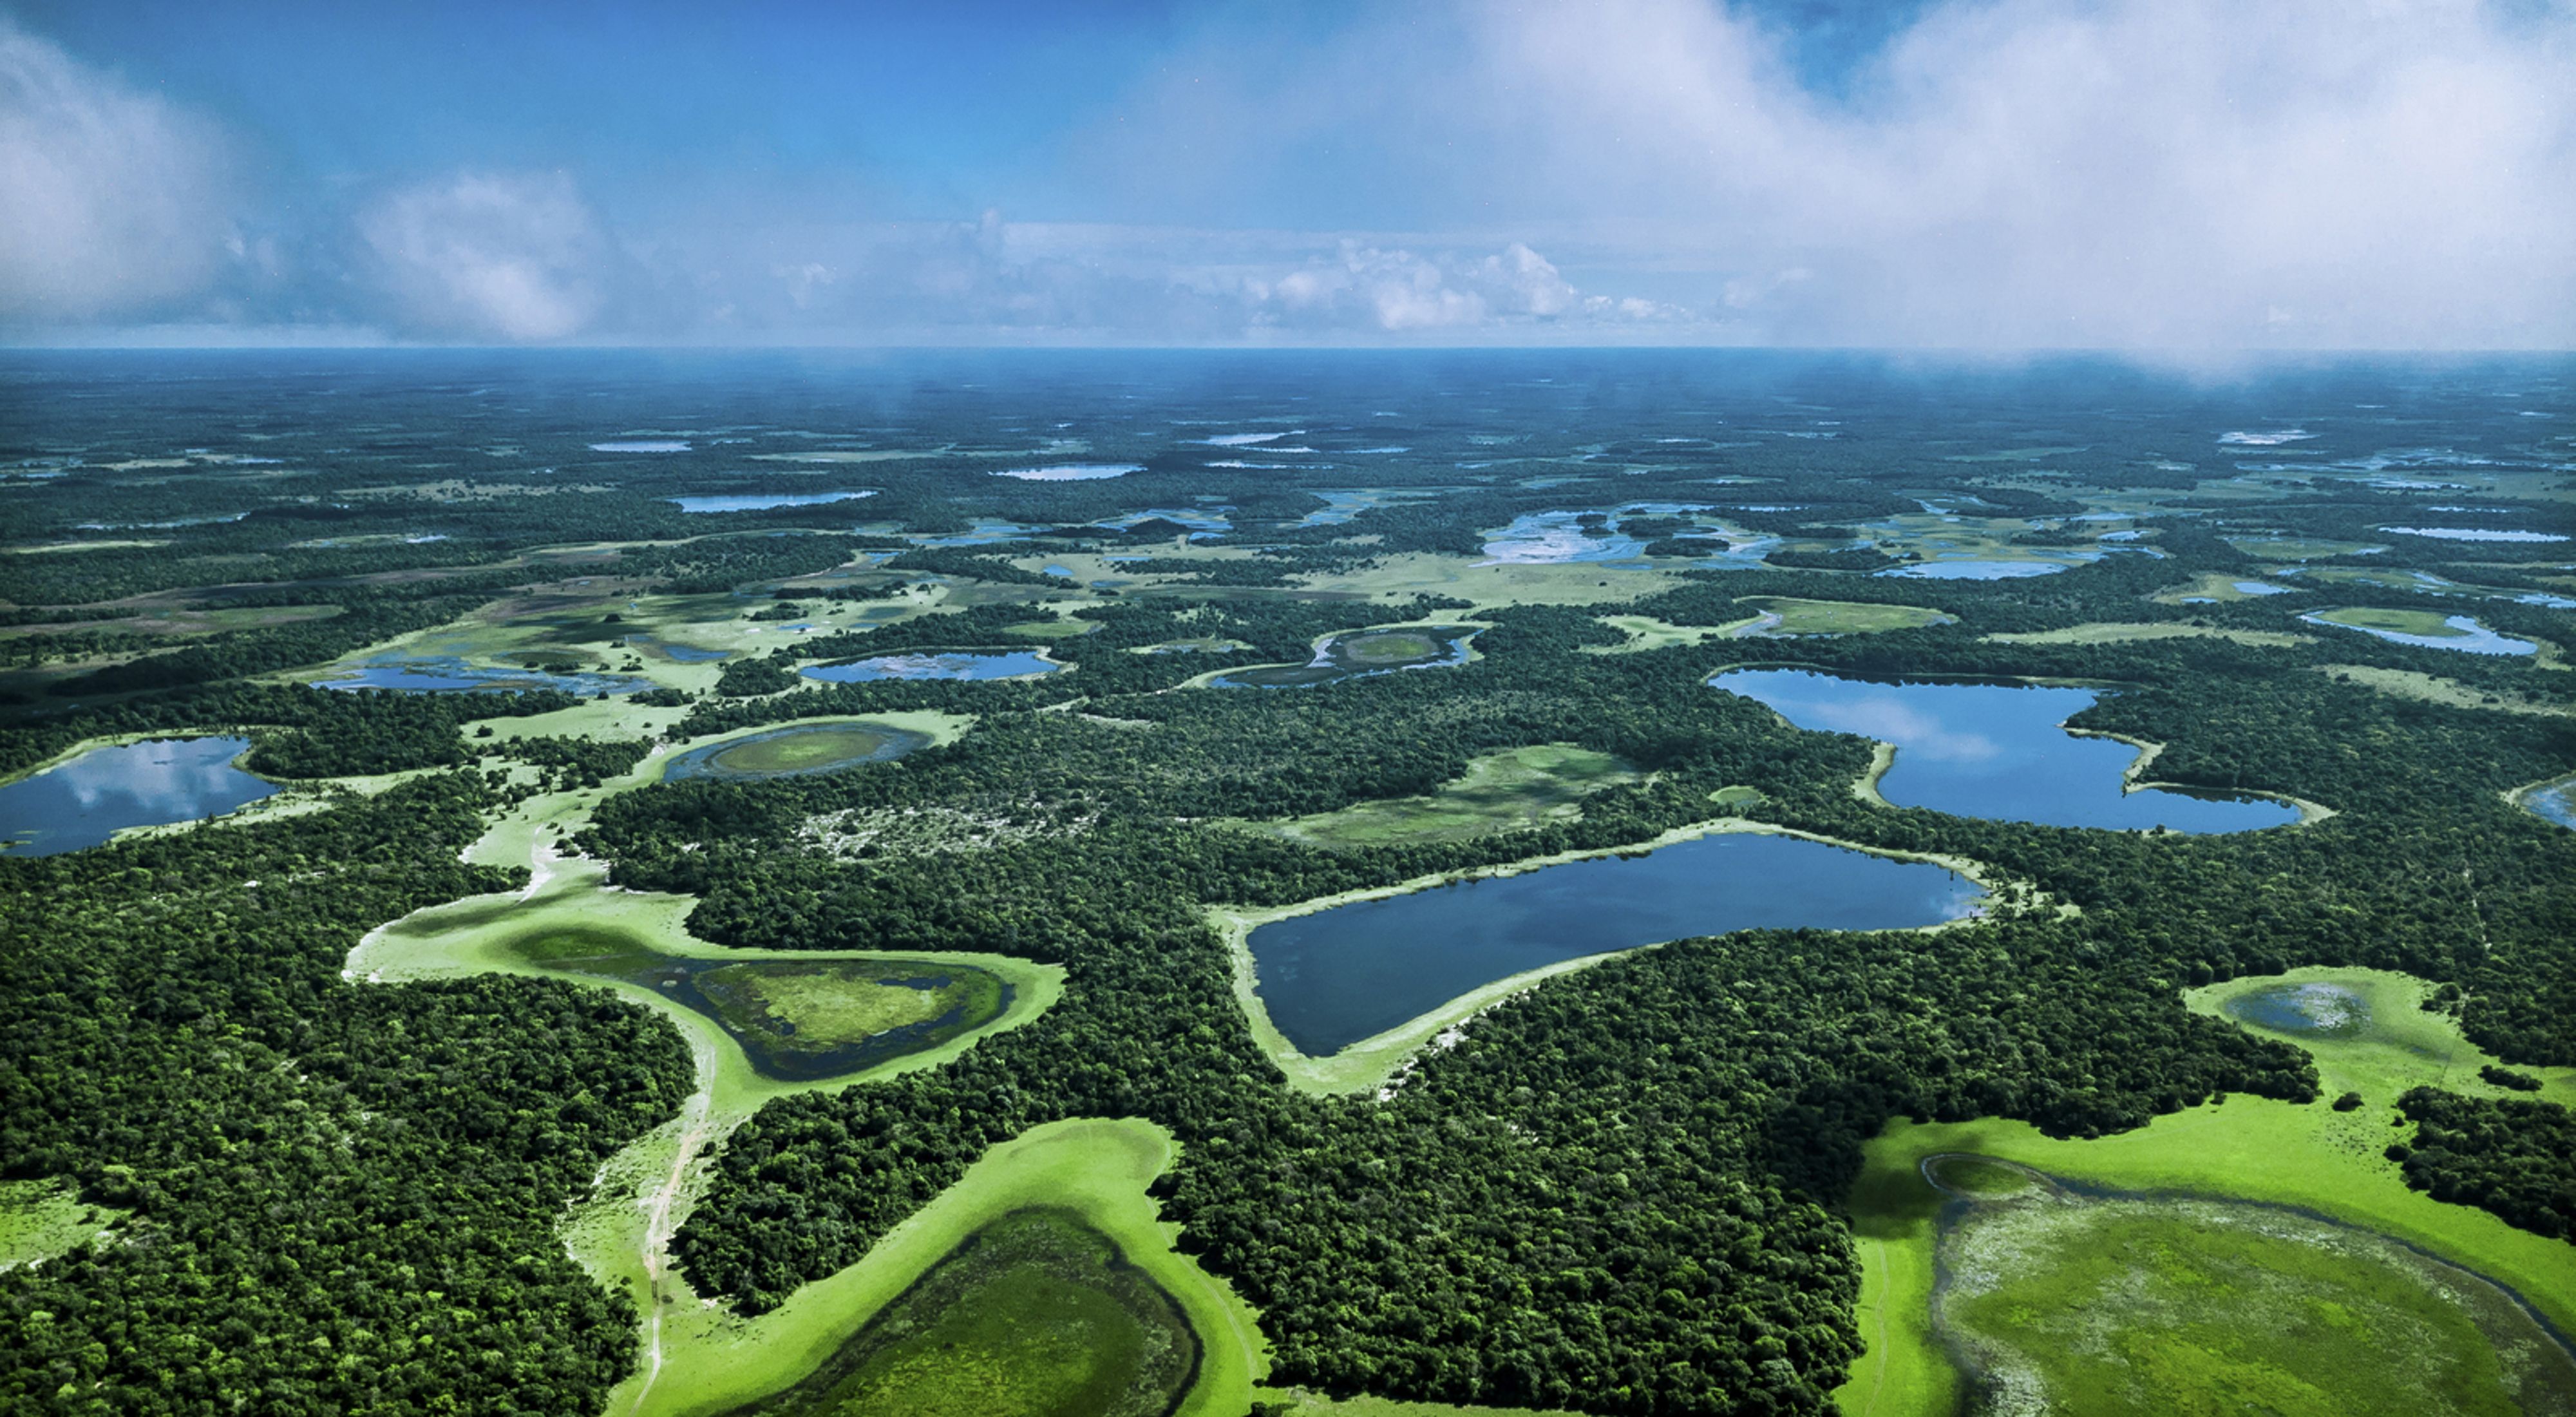 An aerial view of dark and light green wetlands with patches of blue water.